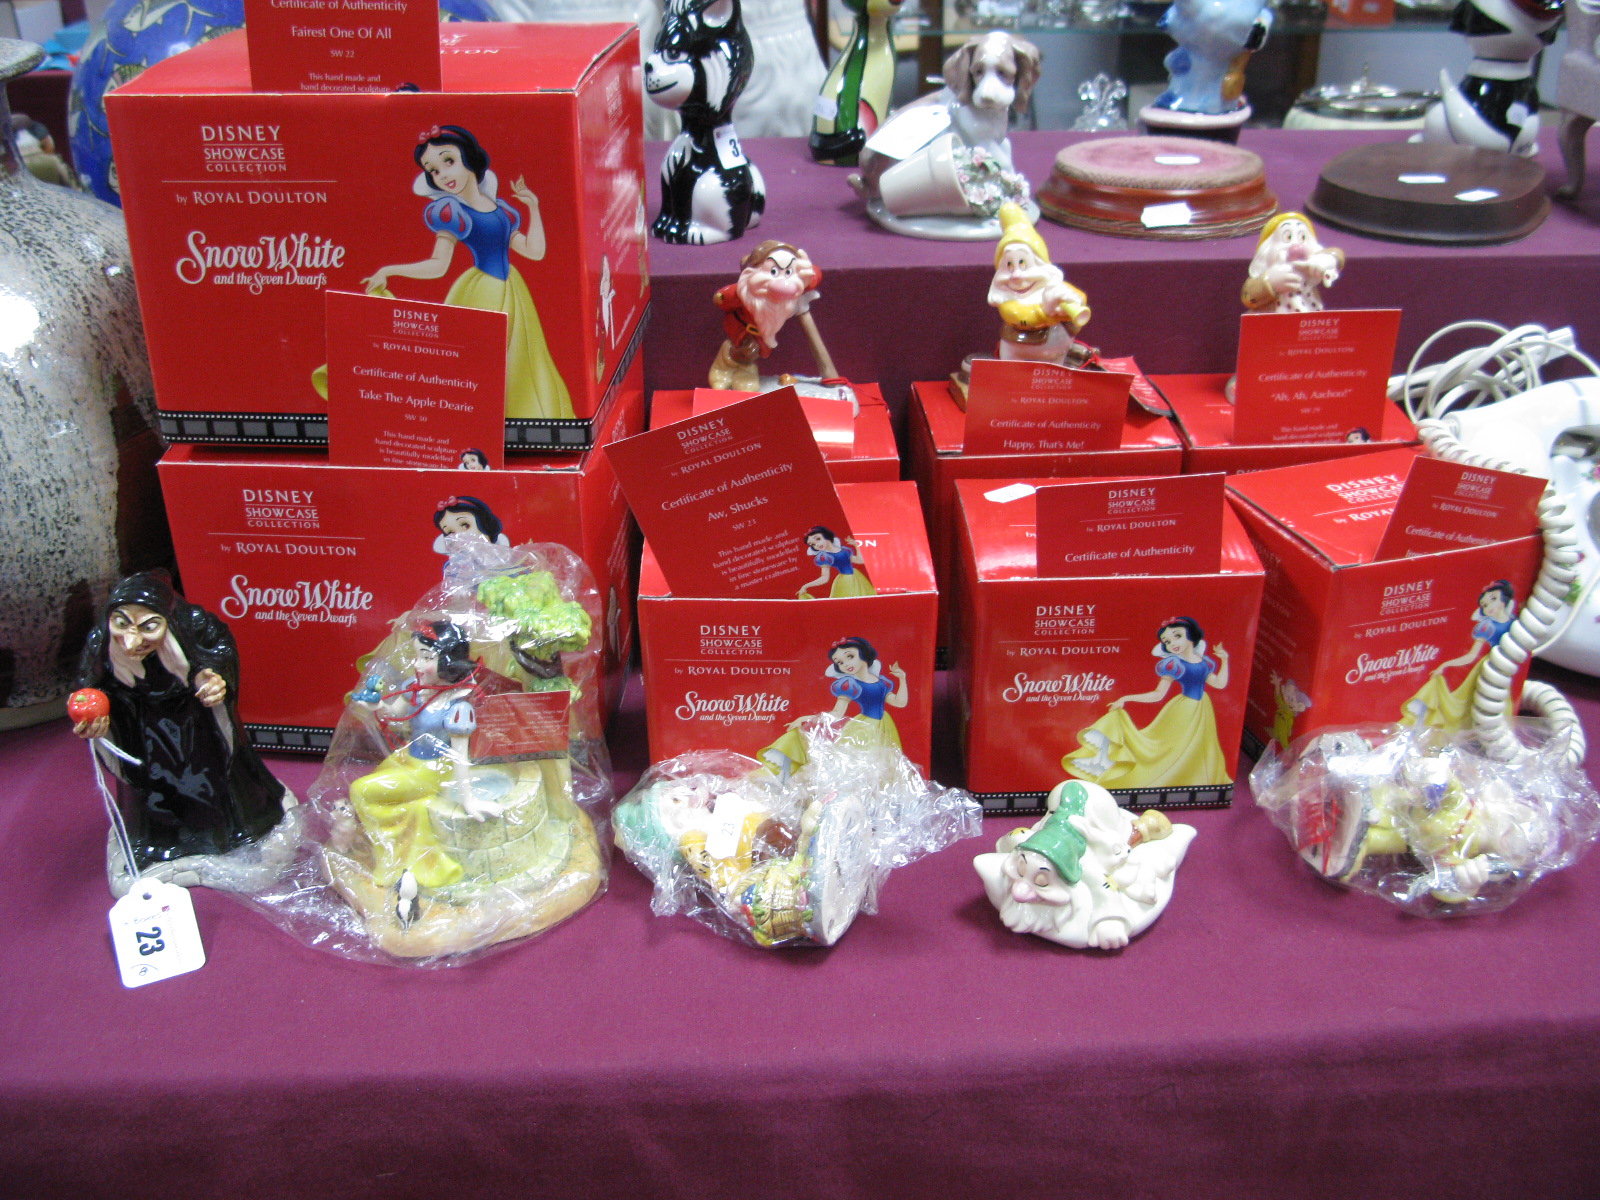 Royal Doulton Snow White Figures 'Take the Apple Dearie', 'Fairest One of All', 'Sneezy', '